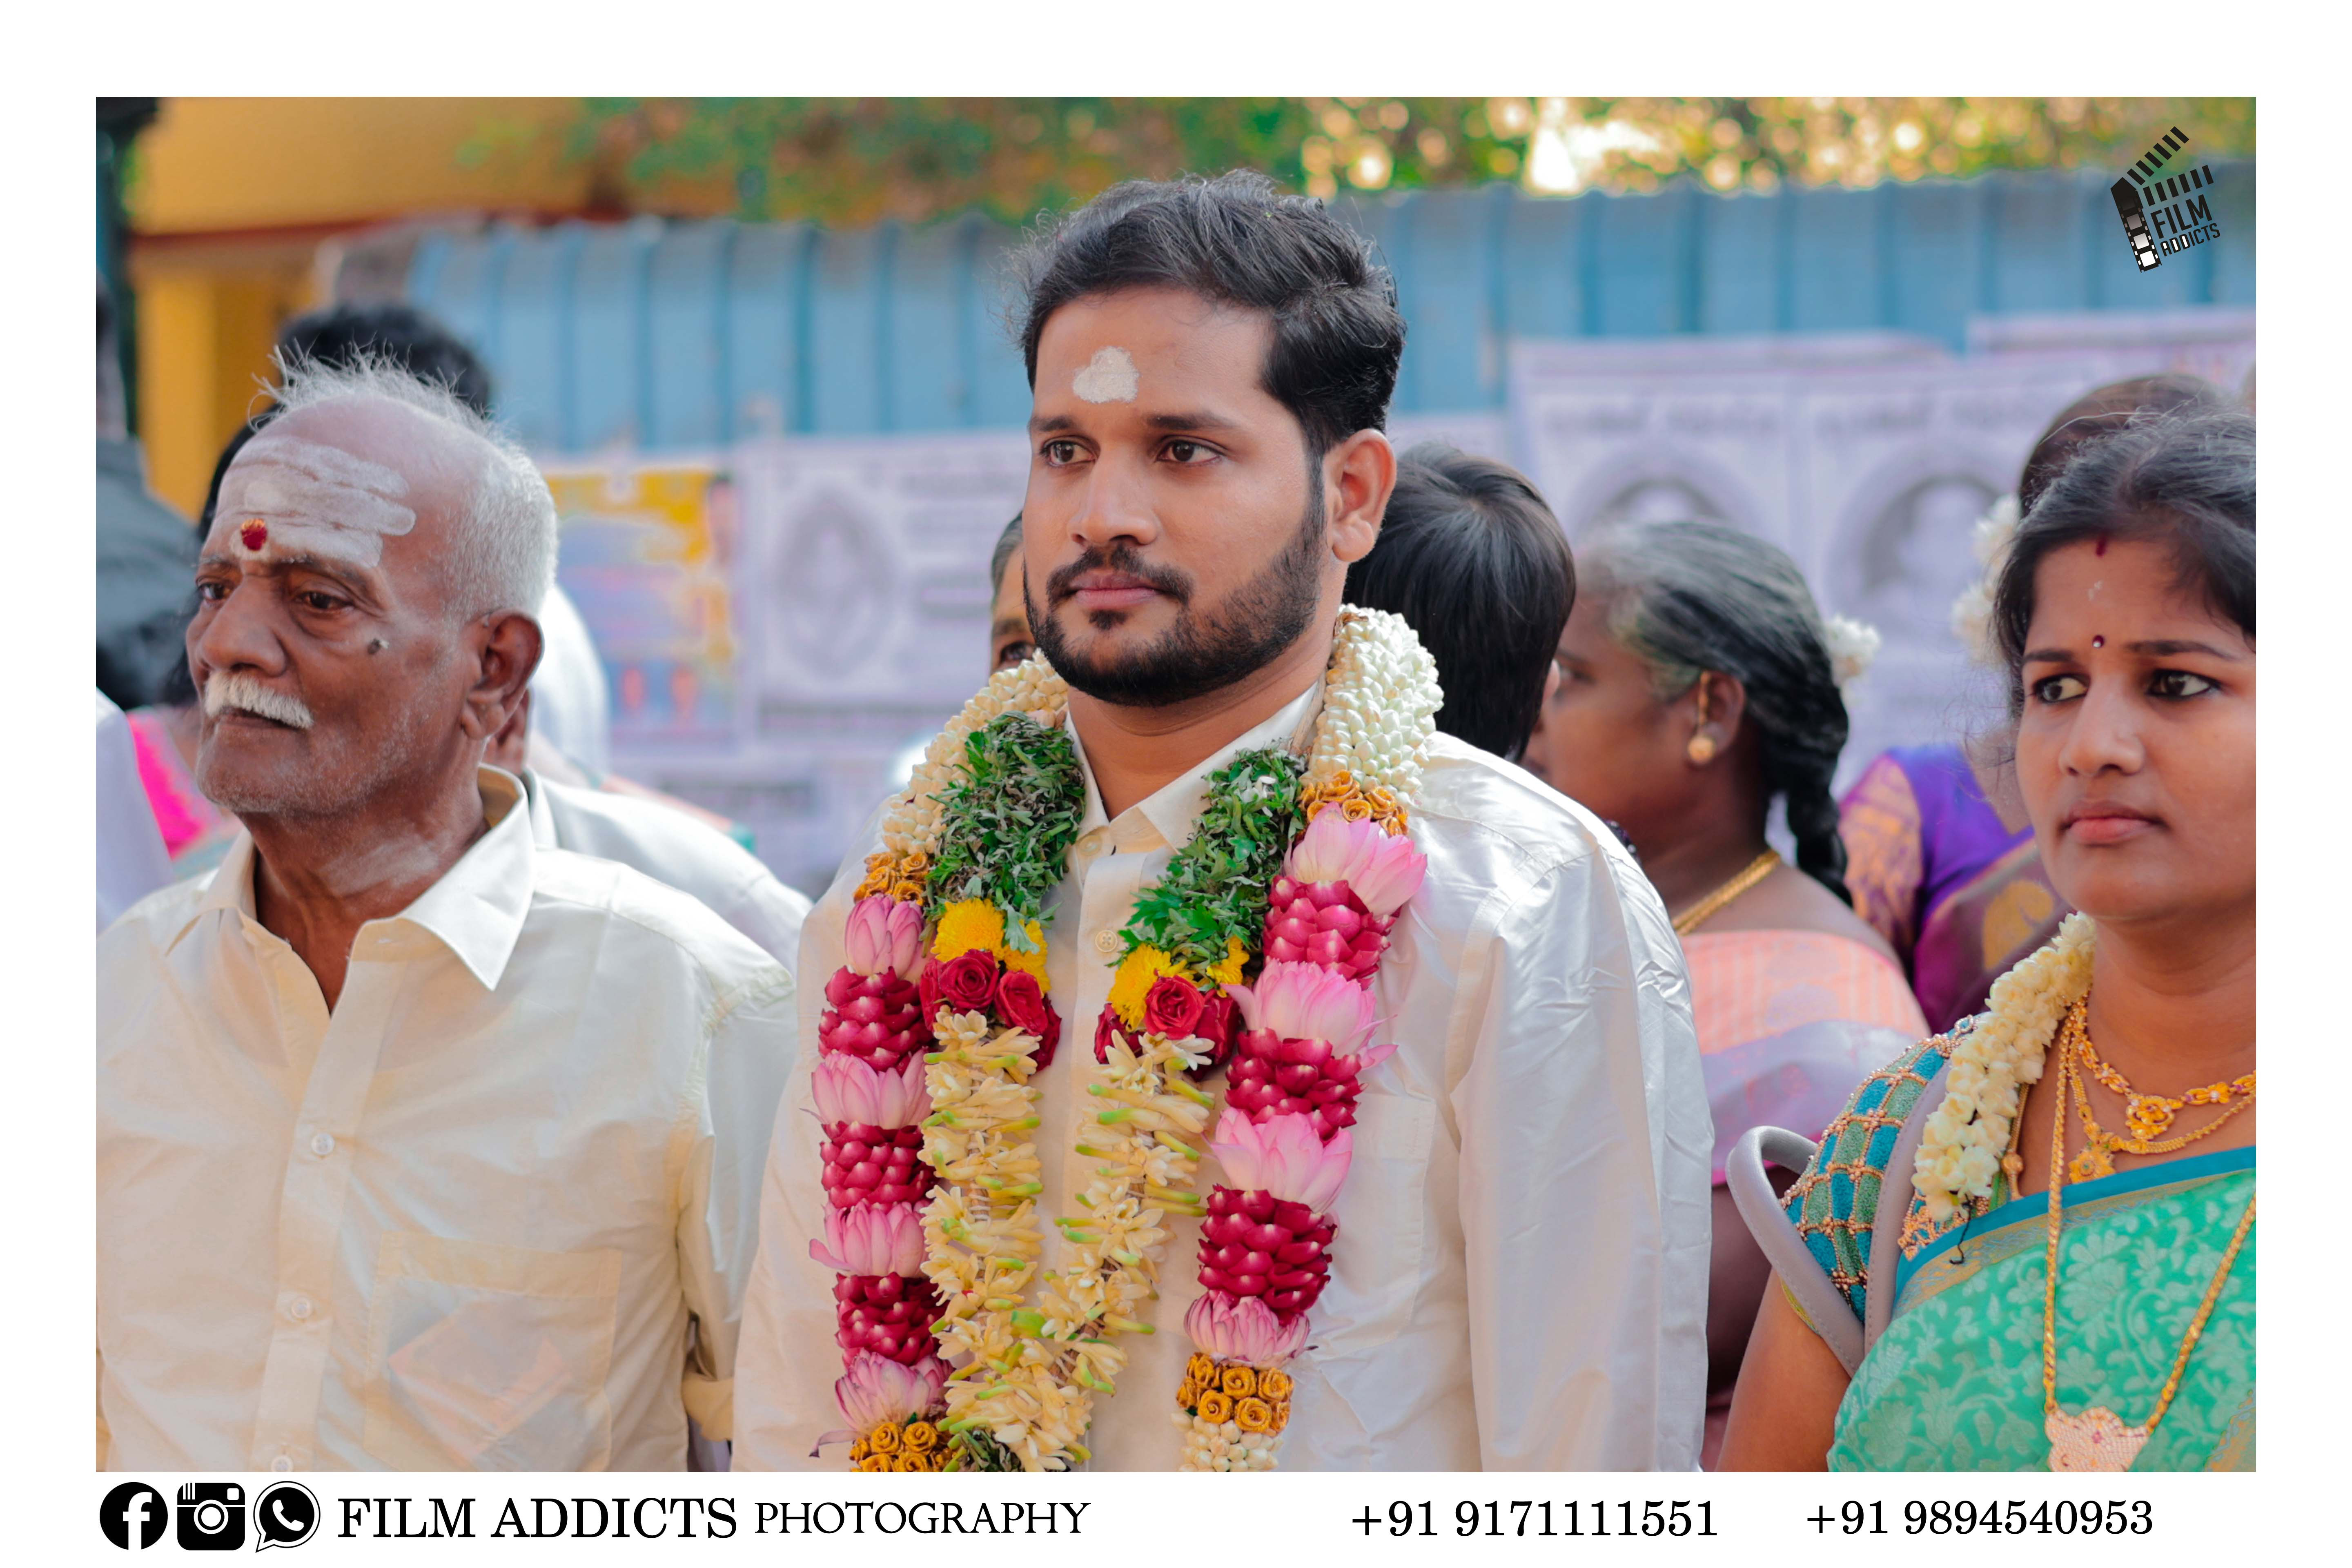 Best Wedding Planners in Karaikudi-FilmAddicts Photography,best candid photographers in Madurai ,Best Wedding Candid photographers in Madurai, Wedding Candid Moments, FilmAddicts Photography ,FilmAddictsPhotography ,best wedding in Madurai, Best Candid shoot in Madurai, Best moment ,Best wedding moments, Best wedding photography in Madurai, Best wedding videography in Madurai, Bestcoupleshoot, Best candid, Best wedding shoot, Best wedding candid, best marriage photographers in Madurai, best marriage photography in Madurai, best candid photography, best Madurai photography, Madurai ,Madurai photography ,Madurai couples ,candid shoot ,candid ,tamilnadu wedding photography, best photographers in Madurai, Best Wedding Photographers in Madurai,  Wedding Candid Moments FilmAddicts Photography, FilmAddicts Photographers,  Best Candid shooting Madurai, bestmoment , Best Wedding moments , Best wedding photography in Madurai, Best wedding videography in Madurai, Best couple shoot, Best candid, Best wedding shoot ,Best wedding candid, best marriage photographers in Madurai, best marriage photography in Madurai, best candid photography, best Madurai photography ,Madurai photography , Madurai couples, candid shoot, candid, tamilnadu wedding photography, best photographers in Madurai, Tamilnadu